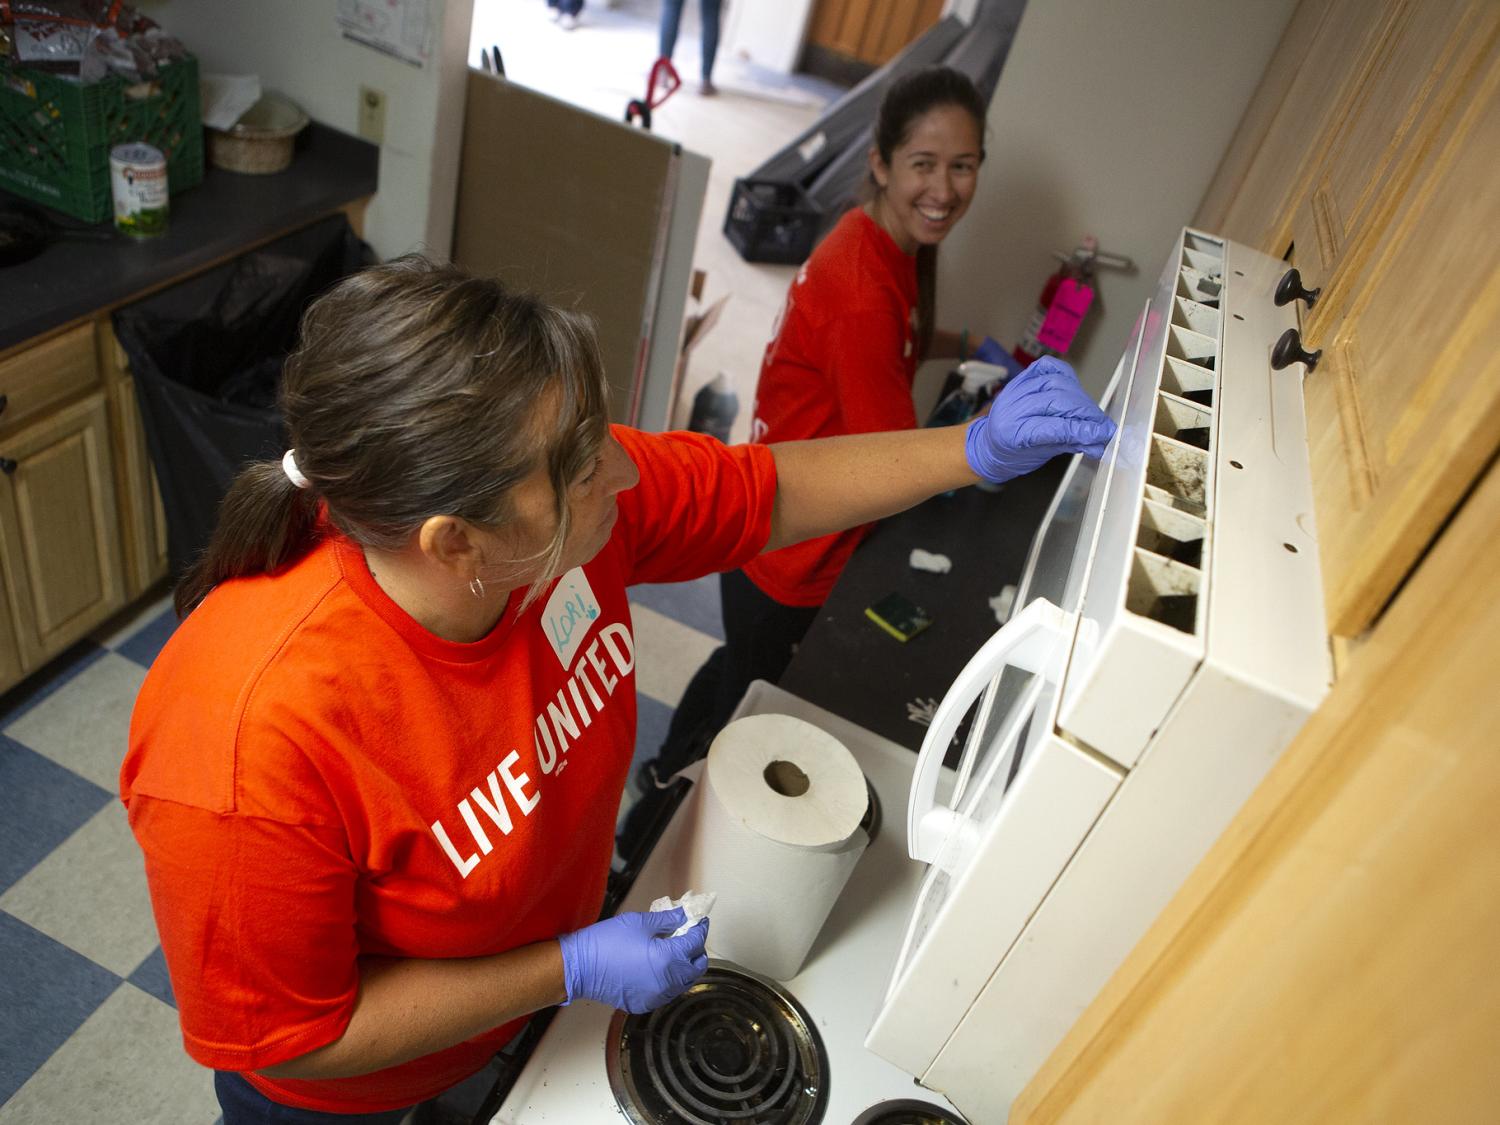 Lori Delbo, left, and Angela Comis, both of Penn State Health Milton S. Hershey Medical Center, help clean the kitchen of a residential apartment of the YWCA of Greater Harrisburg during the 2019 United Way Day of Caring. (NOTE: This photo was taken prior to enactment of safety protocols related to COVID-19.) Credit: Penn State Health. All Rights Reserved.